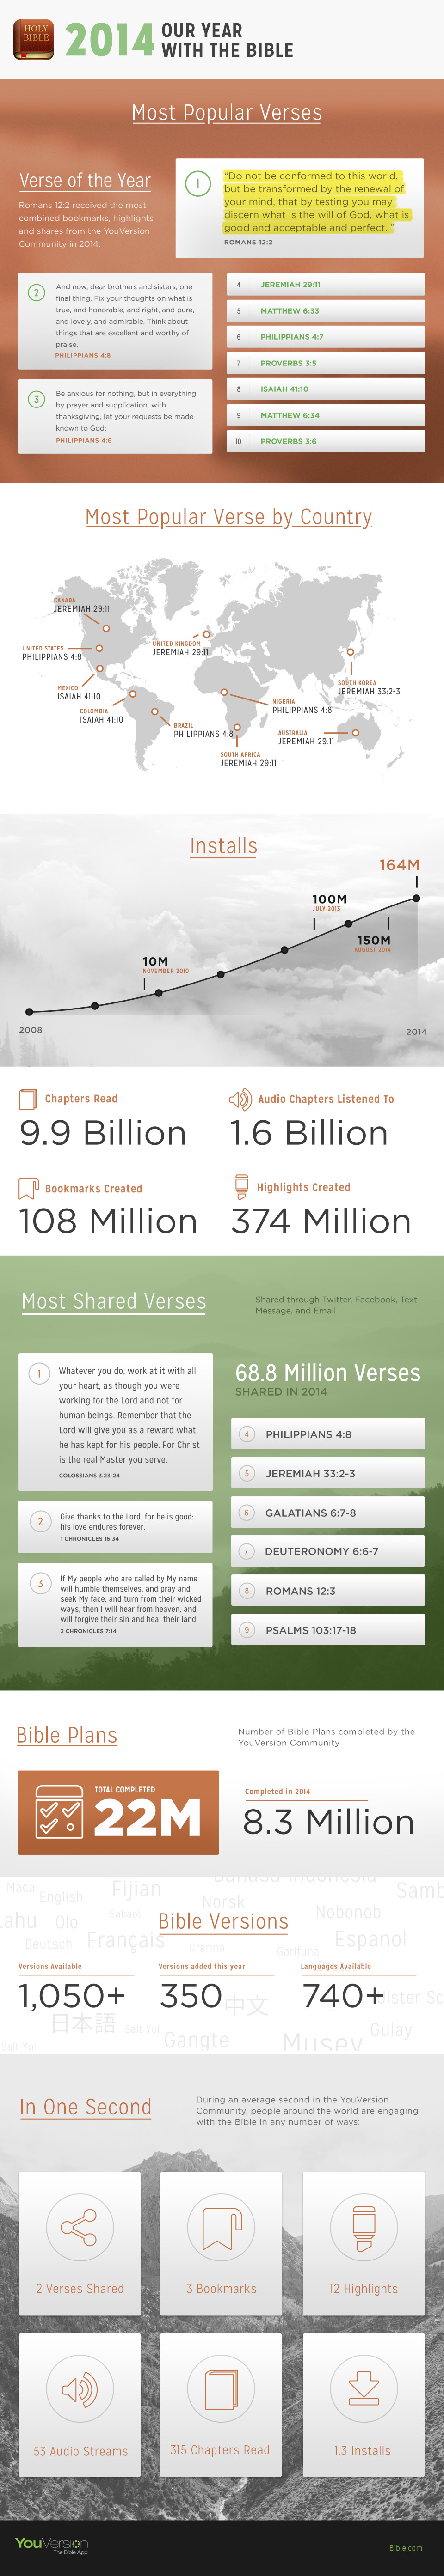 2014 - Our Year with the Bible. Most popular verses, most popular by country, installs, chapters, bookmarks and highlights created, most shared verses, Bible Plan completions, Bible versions and in one second stats.